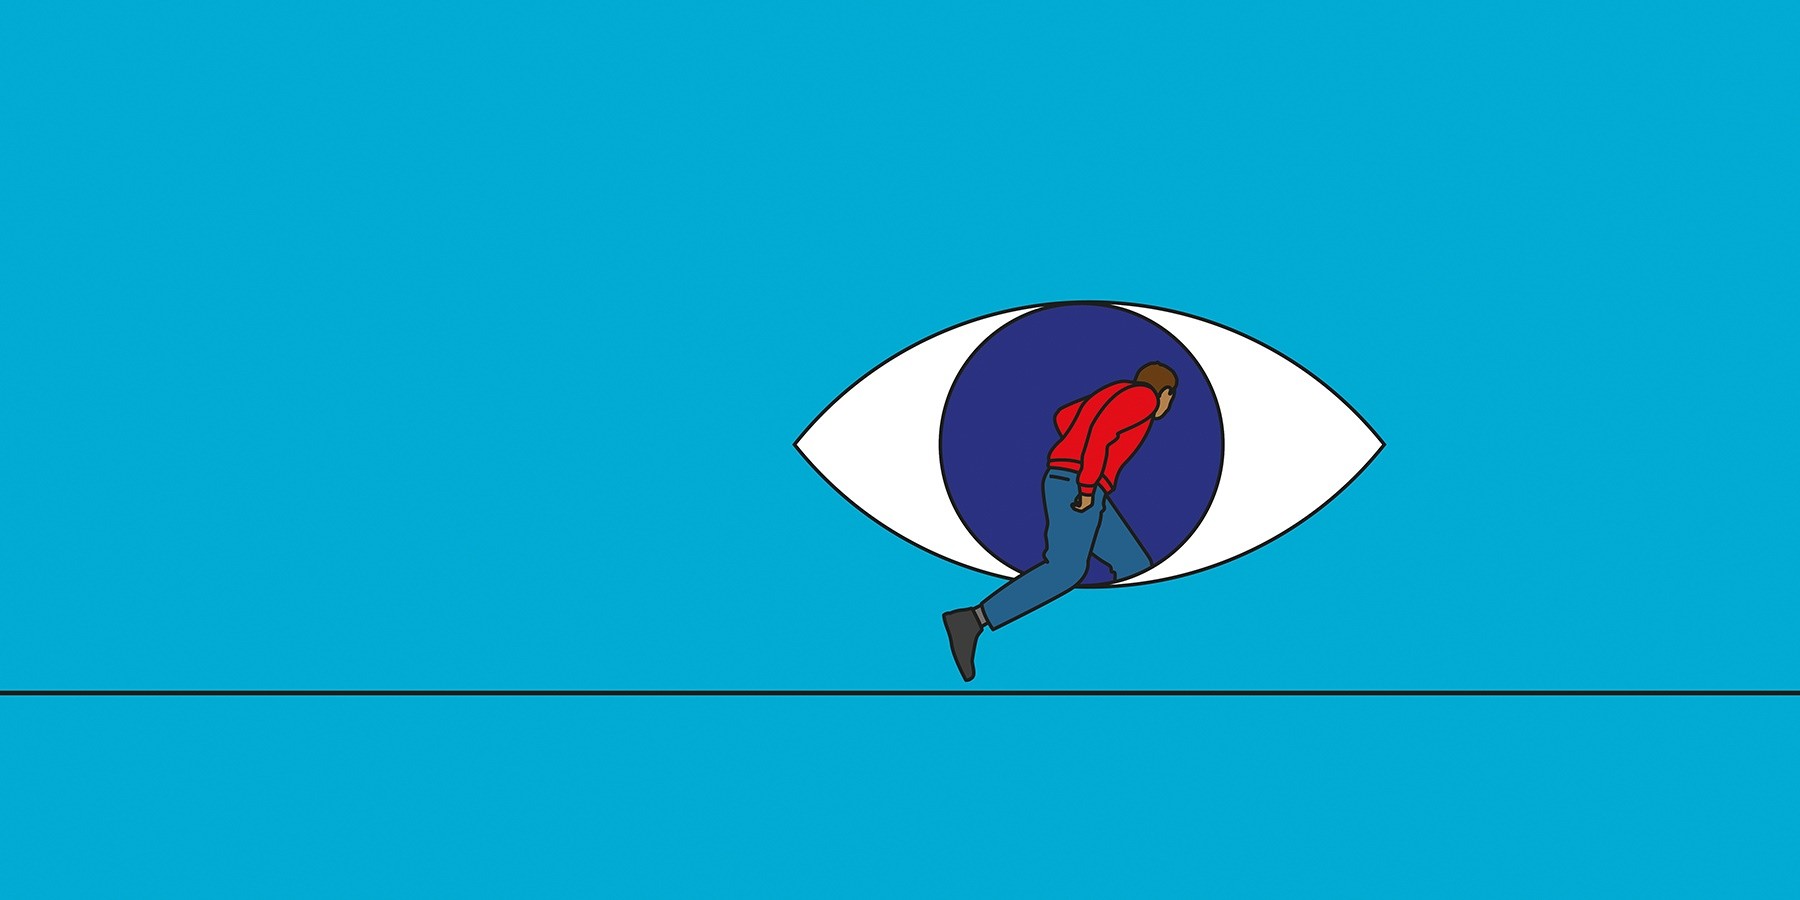 Illustration of a person climbing into an eye